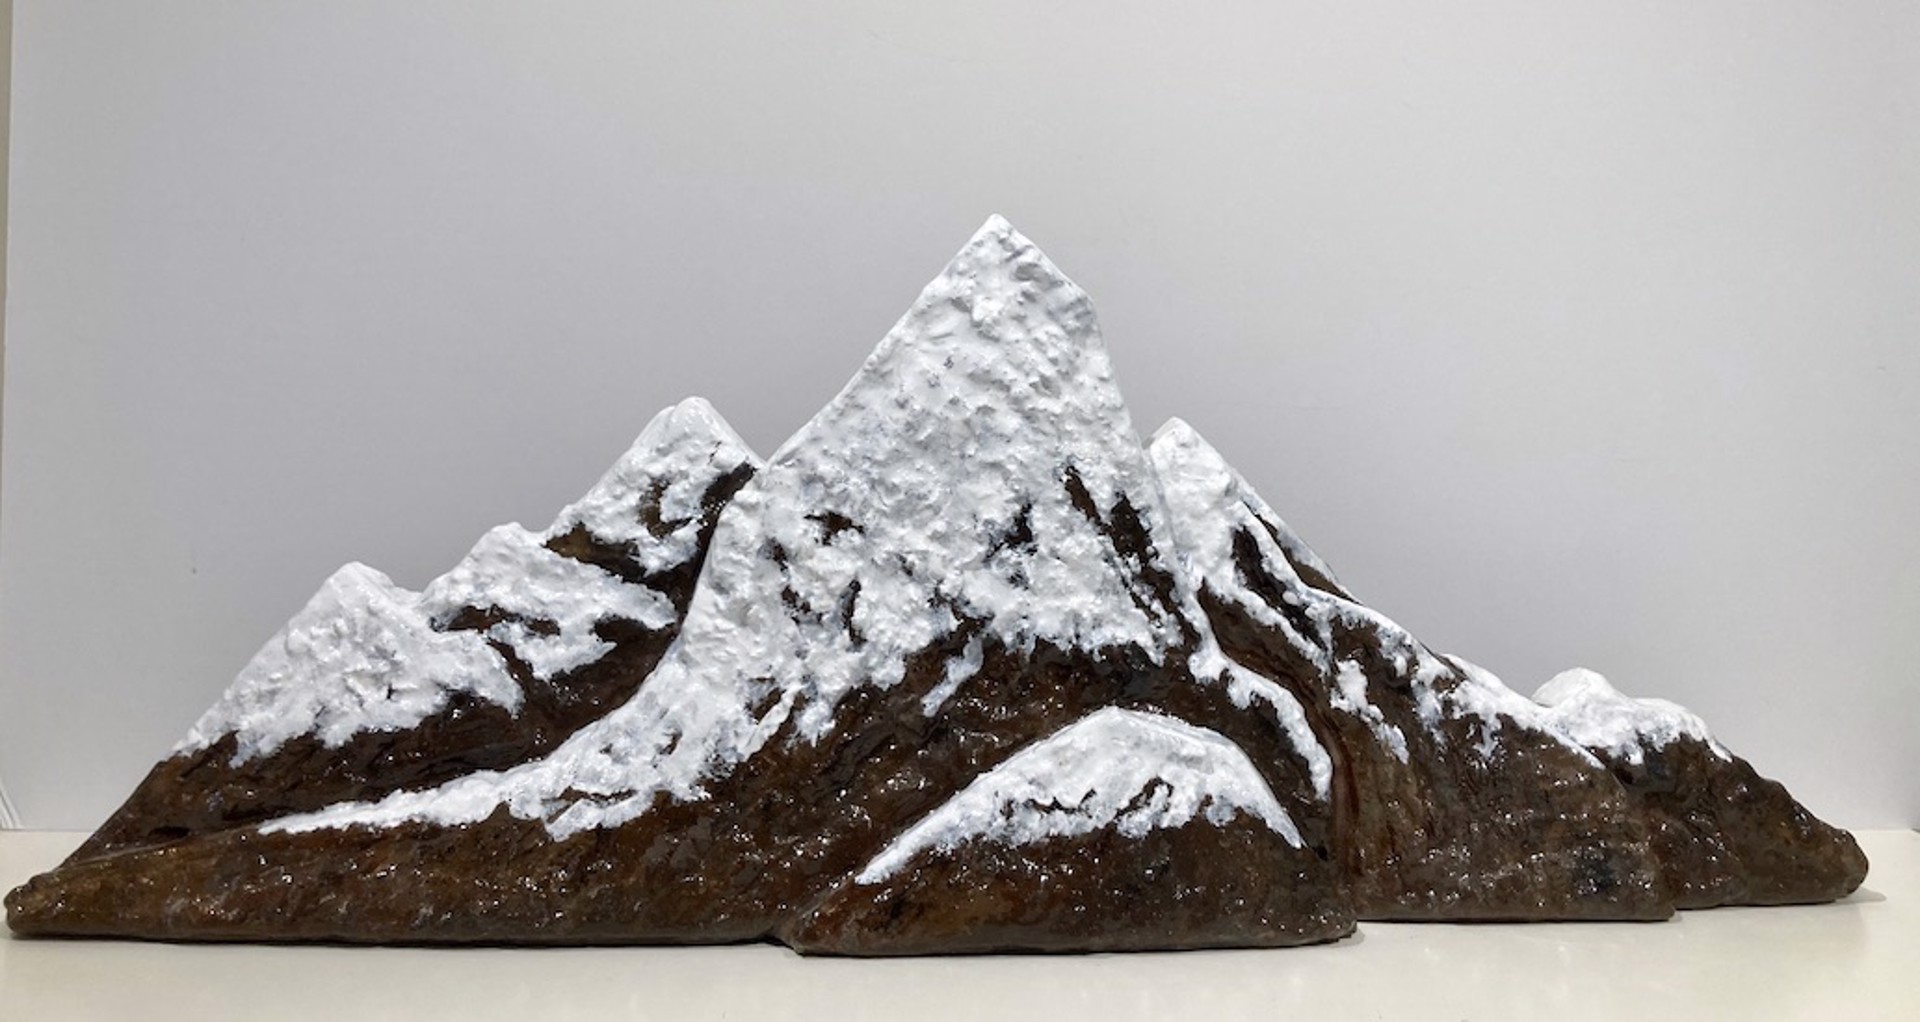 Solid Mountains 4 by Allan Waidman